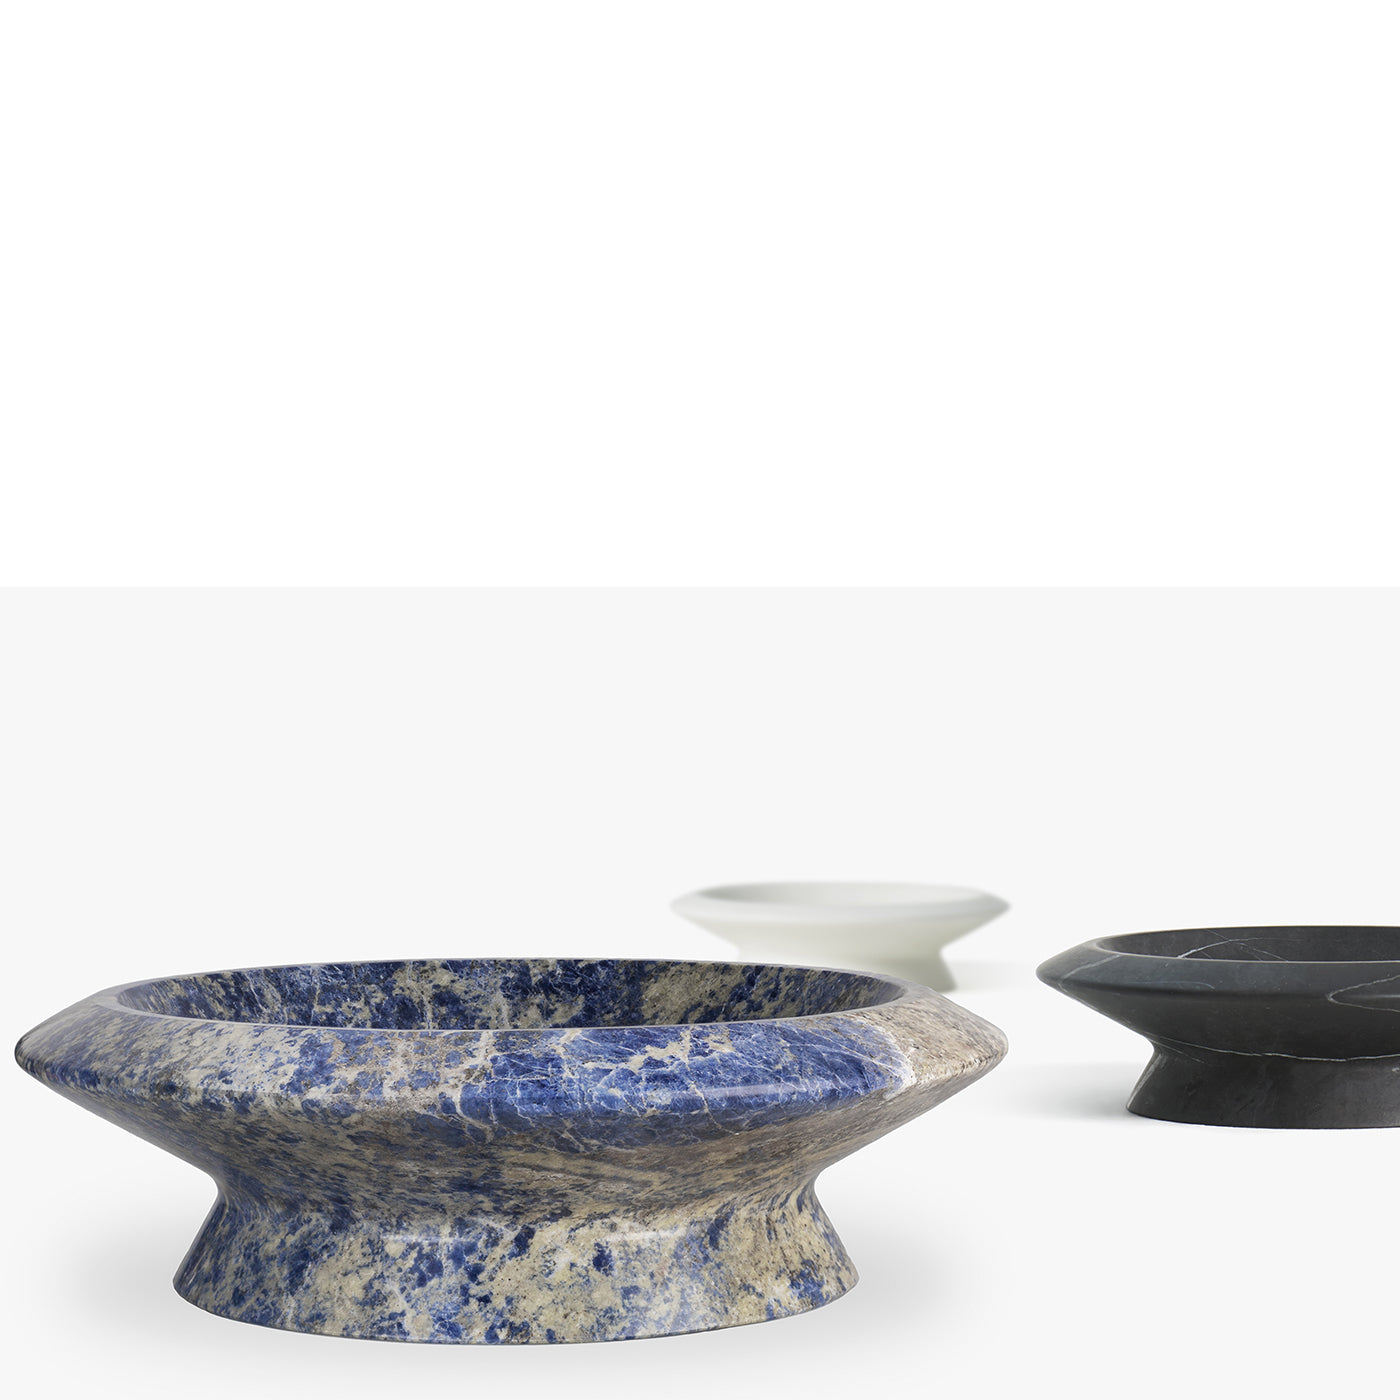 Centerpiece in Blue Sodalite Marble by Ivan Colominas - Alternative view 2